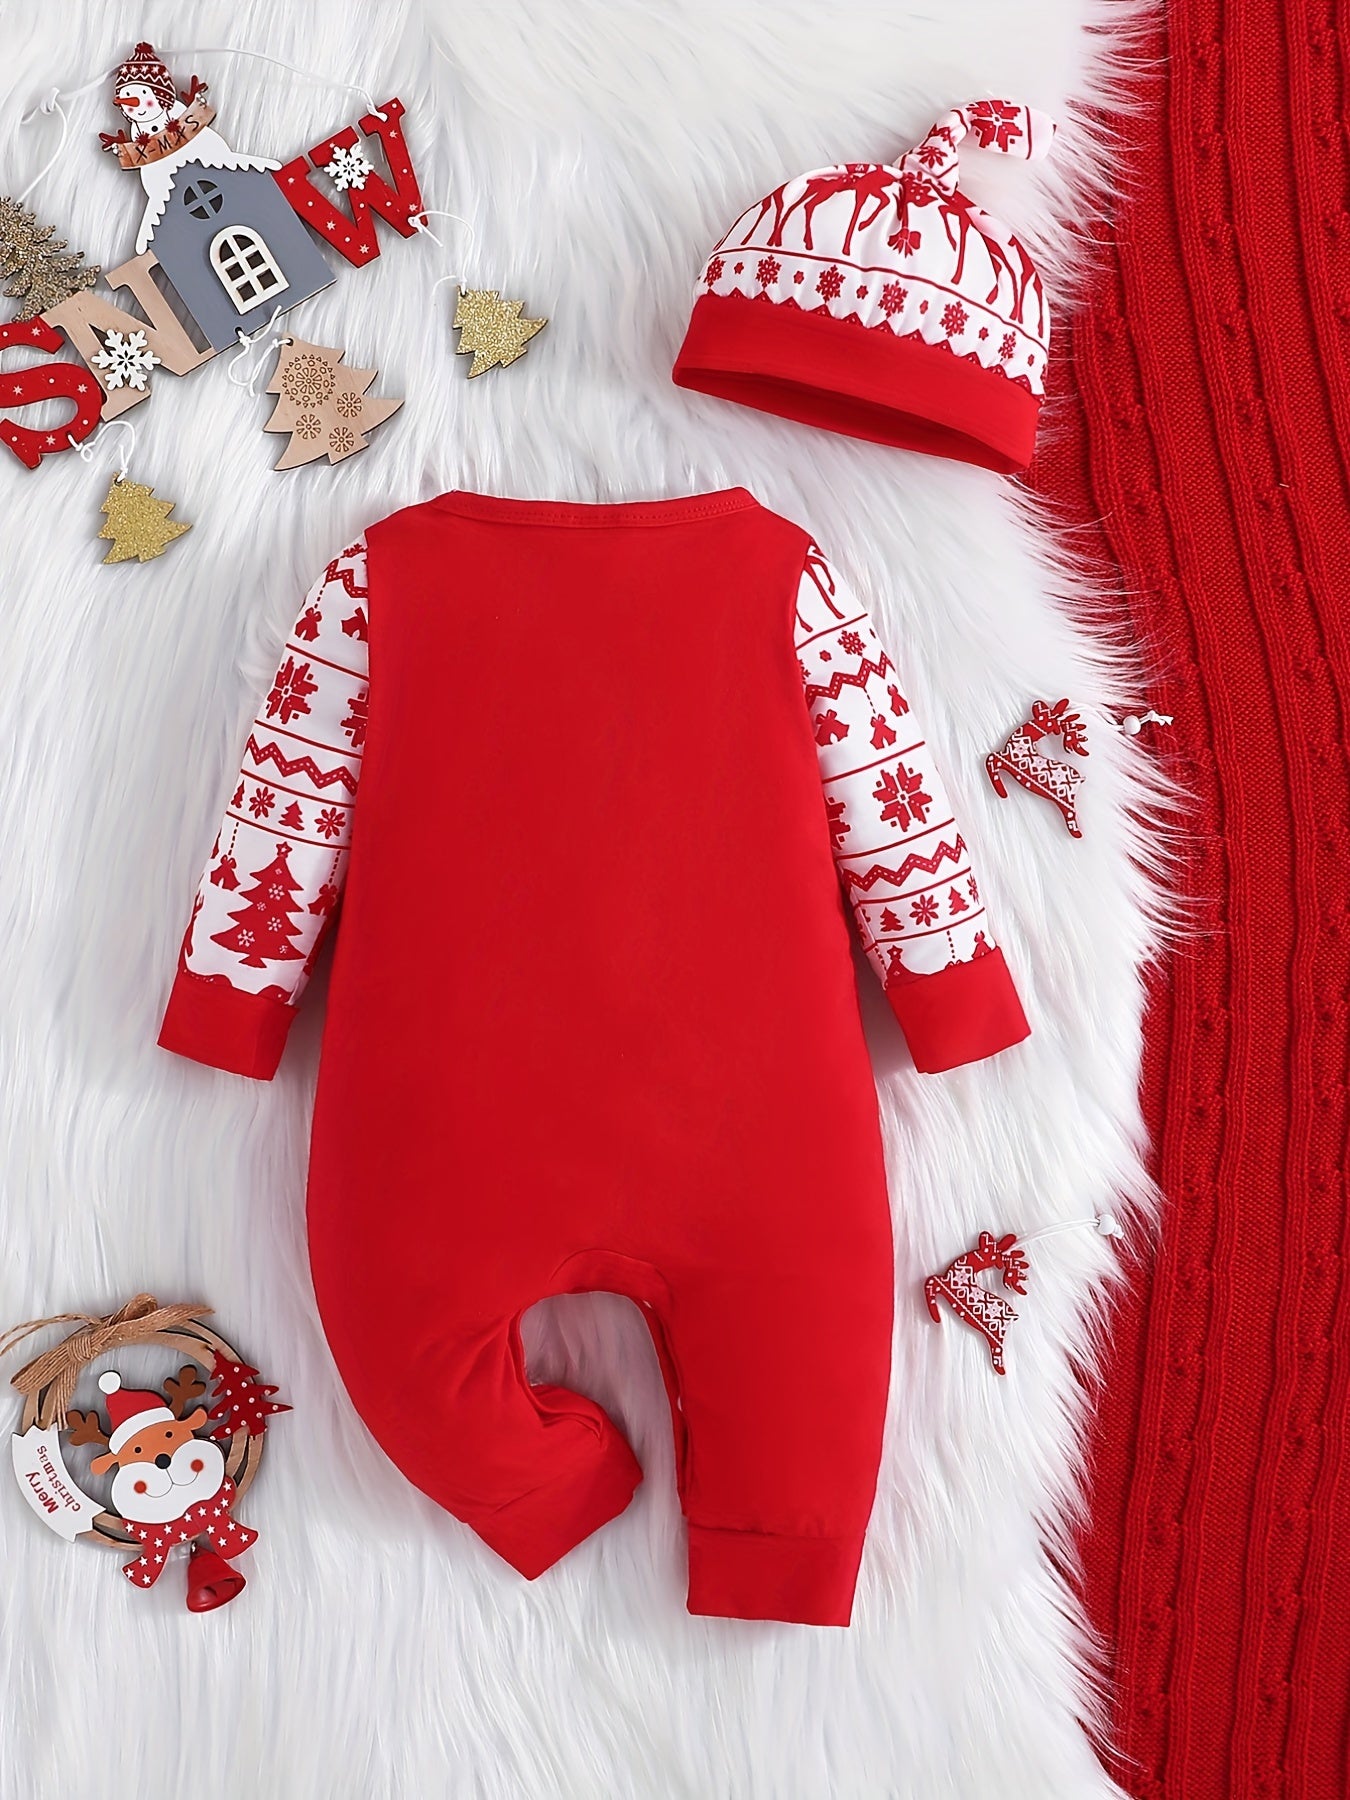 Christmas Cute Reindeer Letters Graphic Toddler Baby's Cute Jumpsuit With Hat, Kid's Pary Casual Clothes